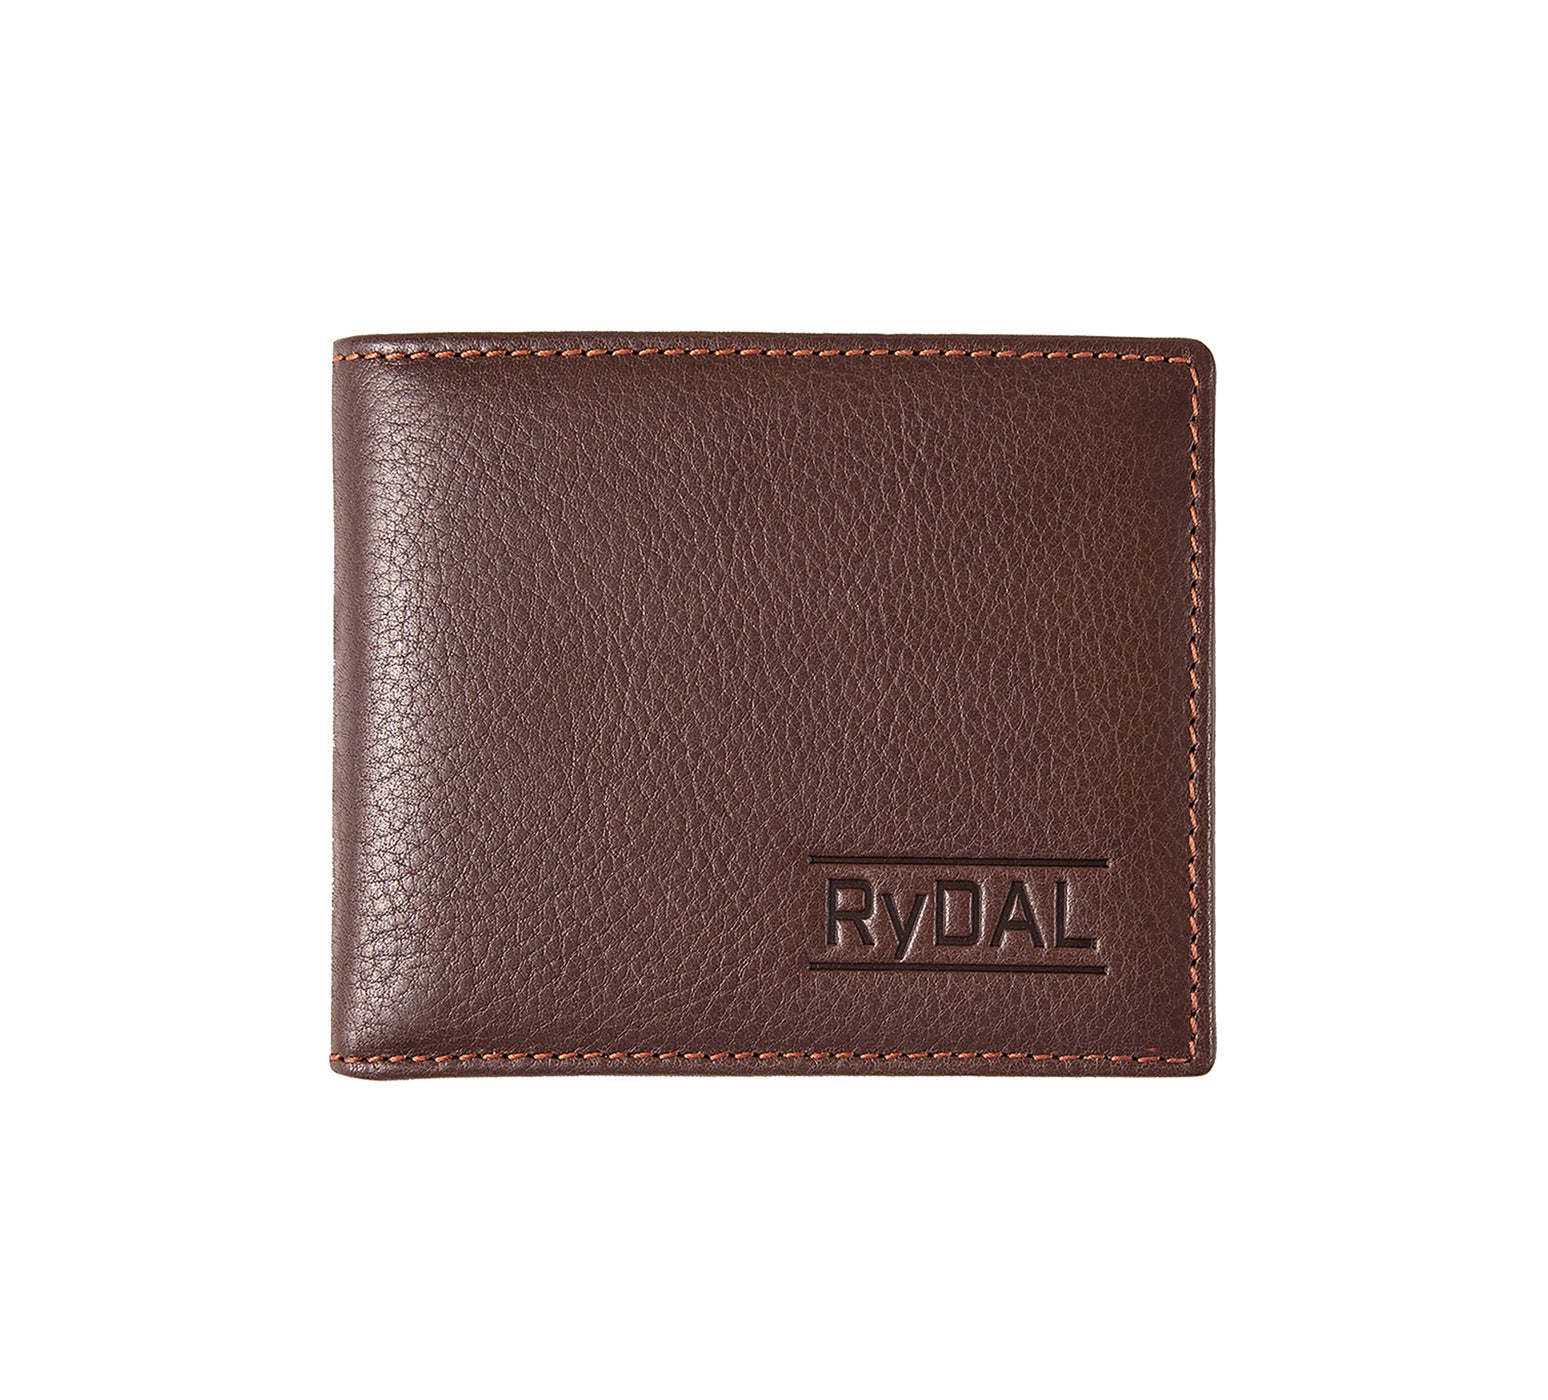 Mens Leather Wallet with Coin Pocket from Rydal in 'Dark Brown/Rust'.